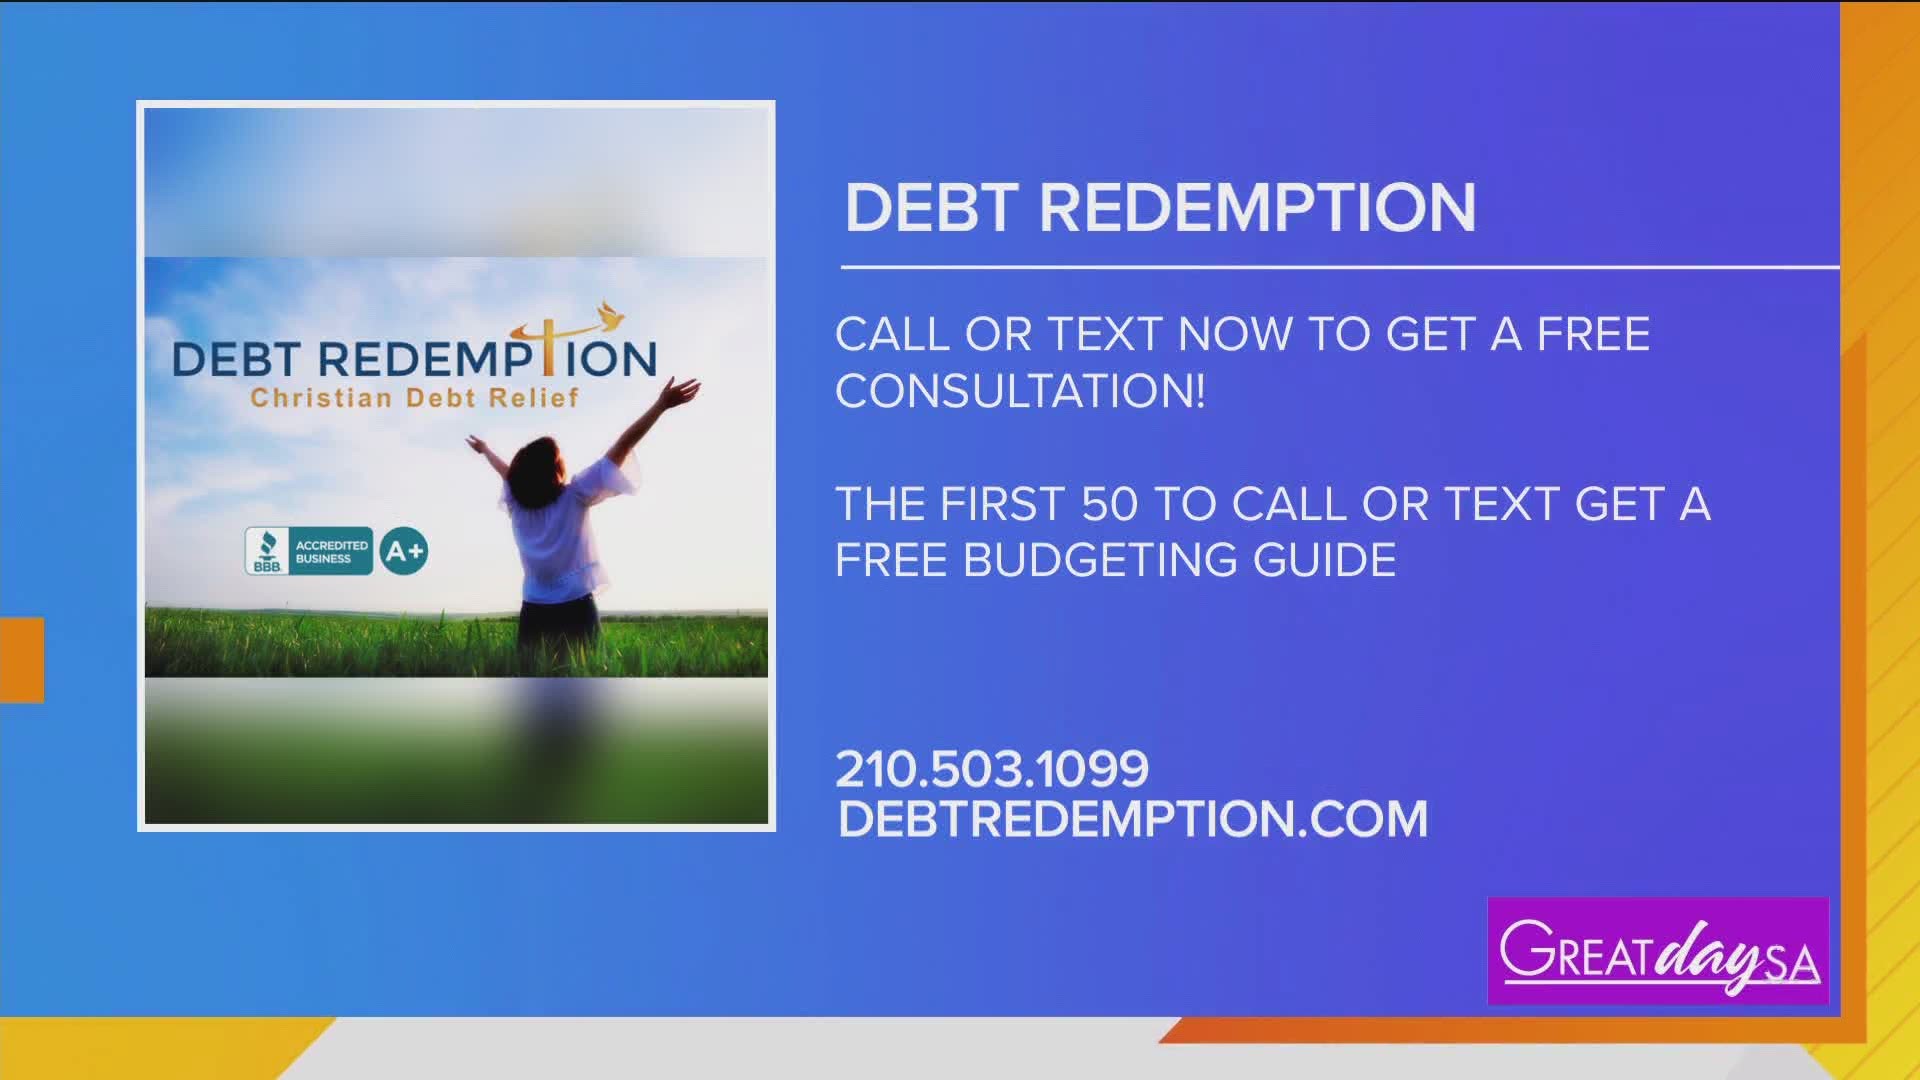 Credit cards can be beneficial in times of need but debt can add up quickly. Debt Redemption shares how they're helping San Antonioans regain control of their debt.